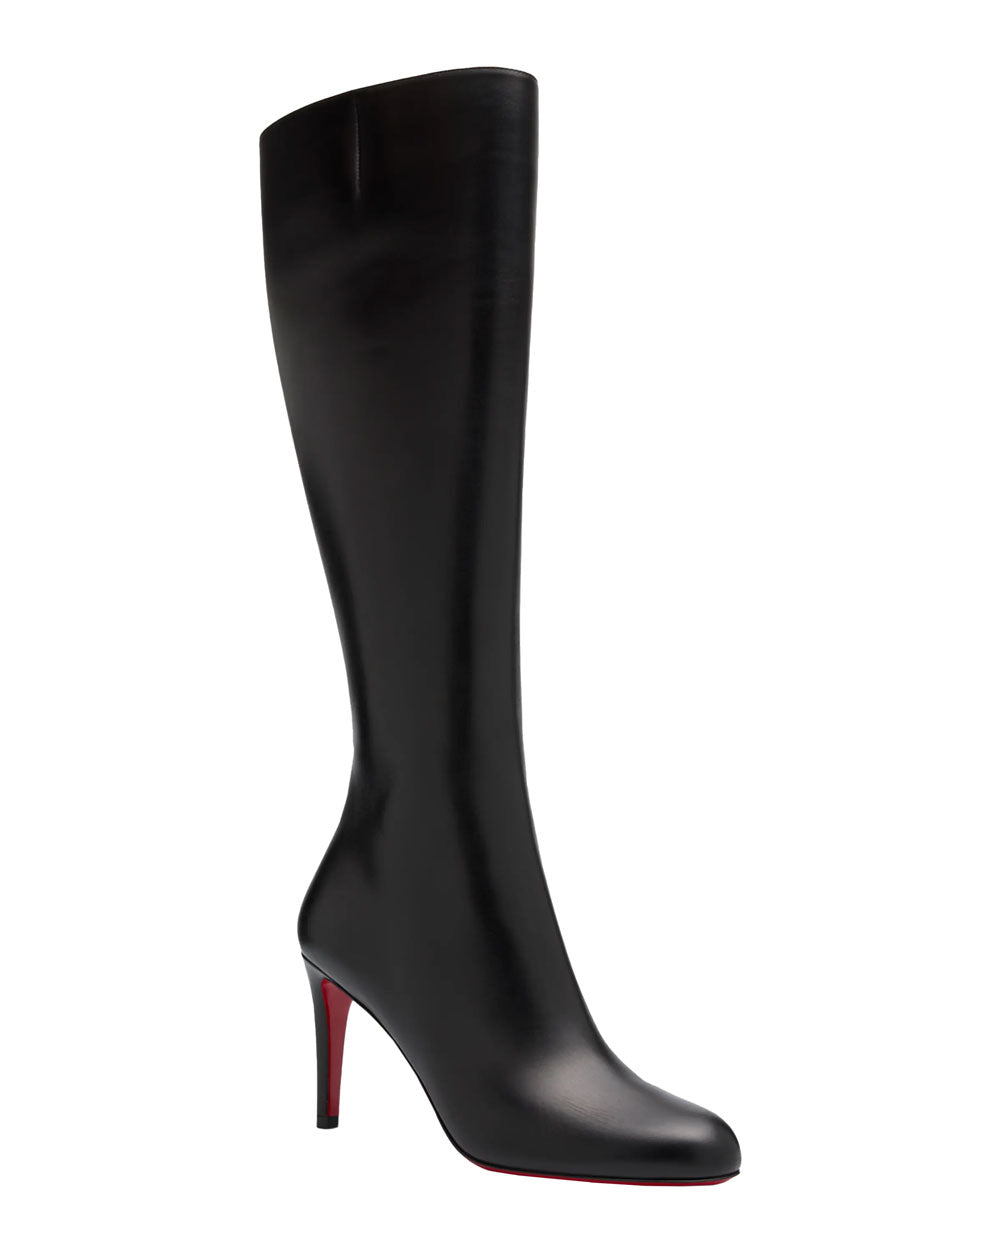 Pumppie Booty Leather Ankle Boots in Black - Christian Louboutin